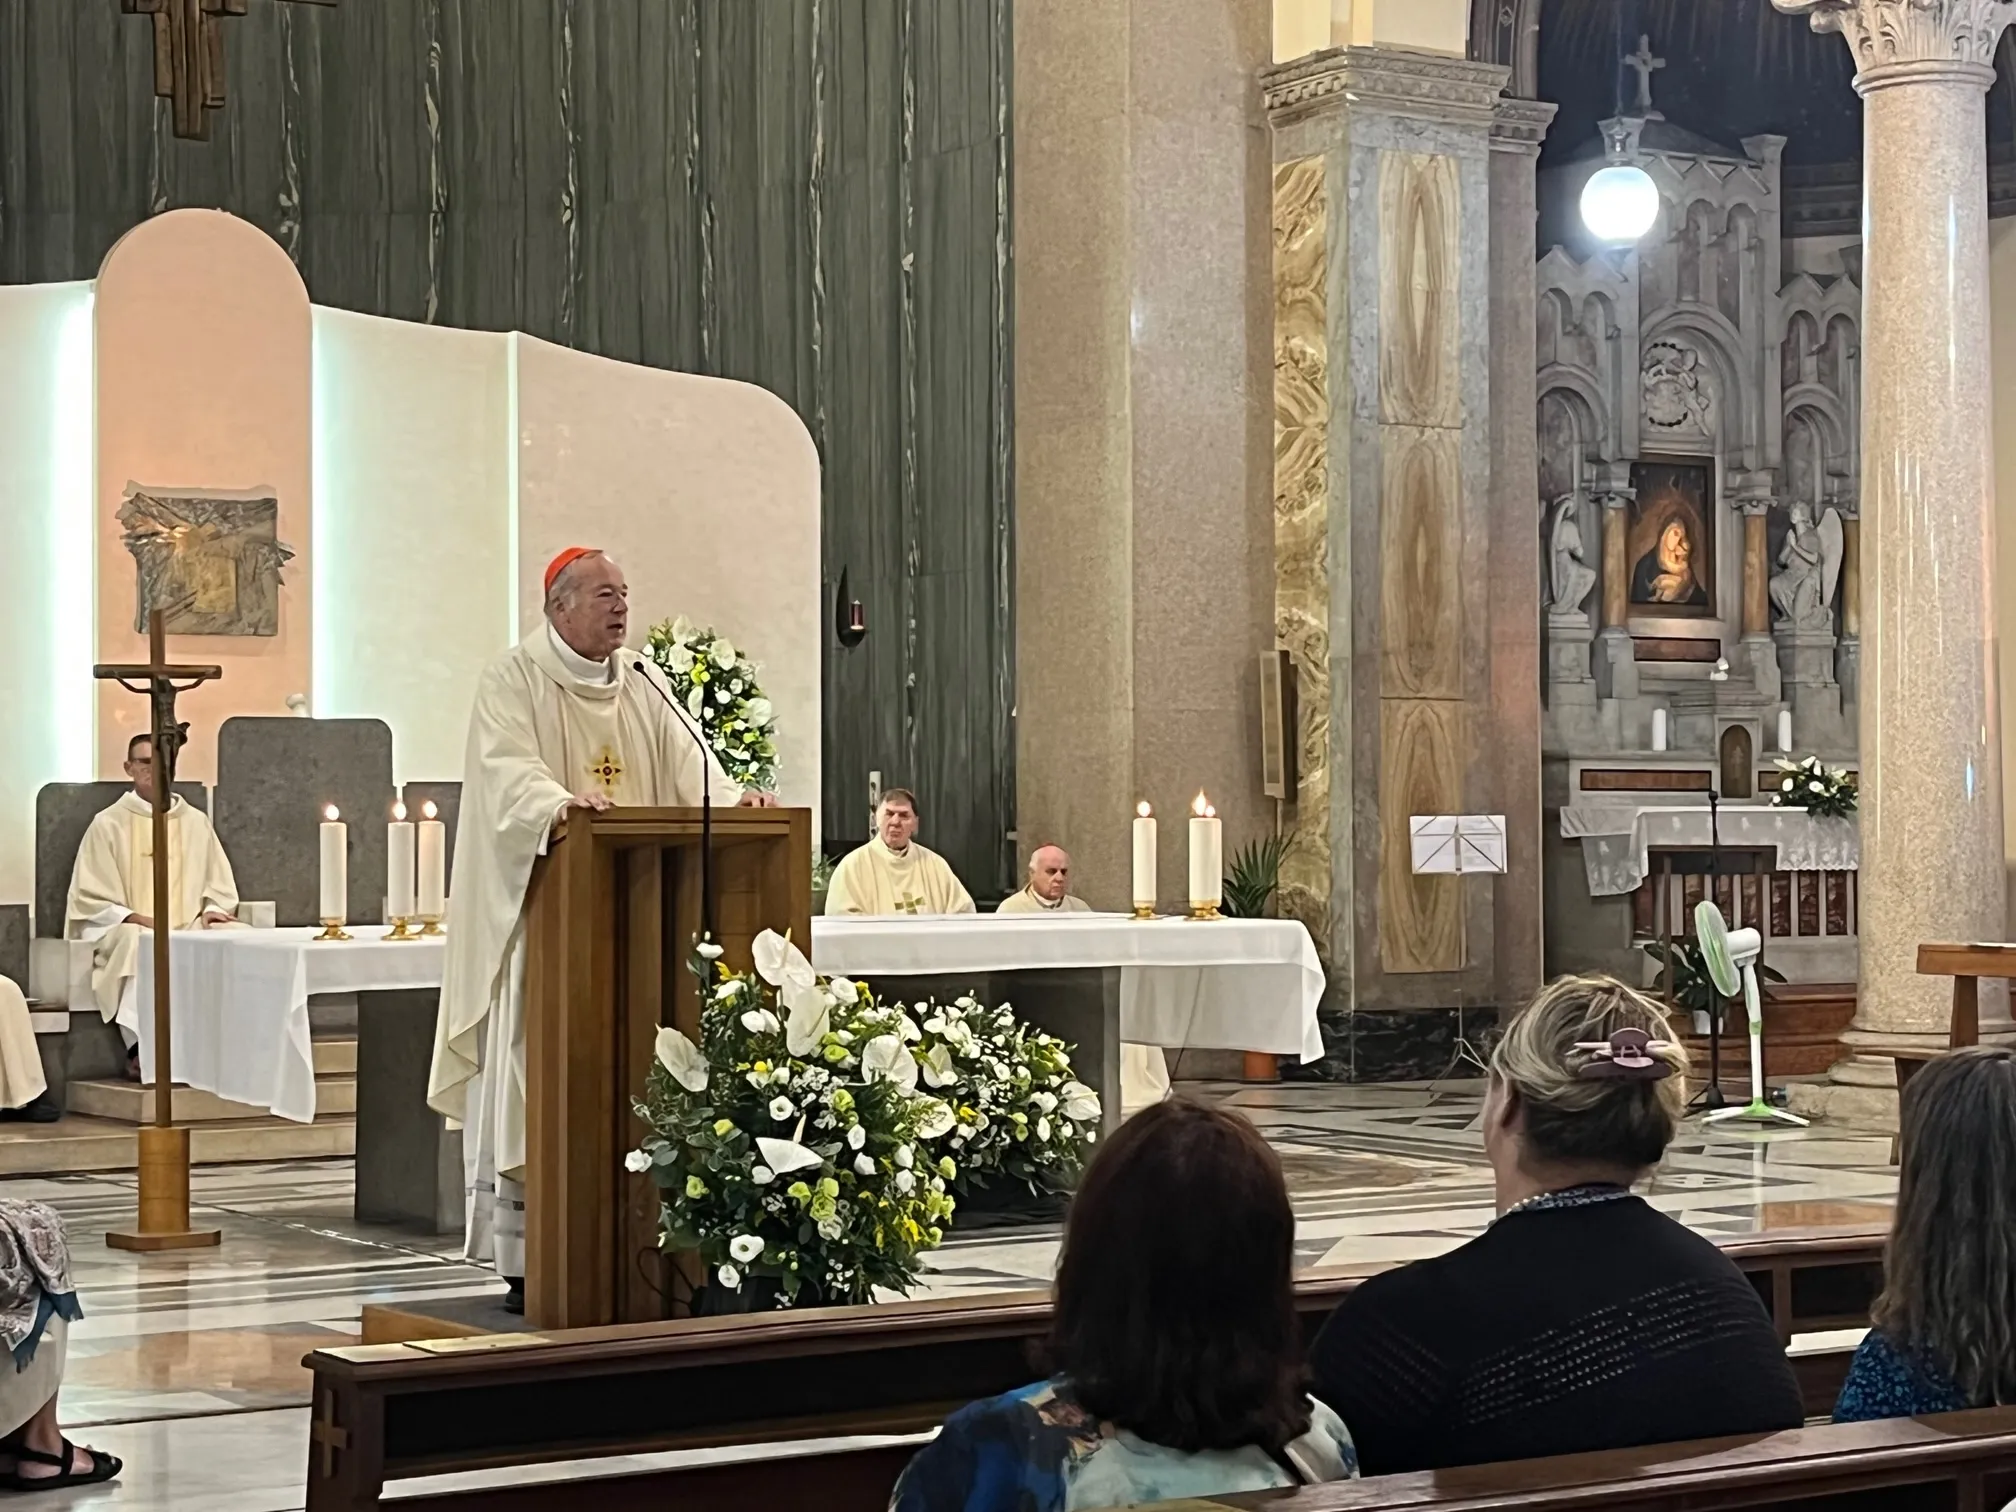 Cardinal Robert McElroy, bishop of San Diego, celebrates Mass at St. Patrick's Church in Rome Aug. 28, 2022.?w=200&h=150